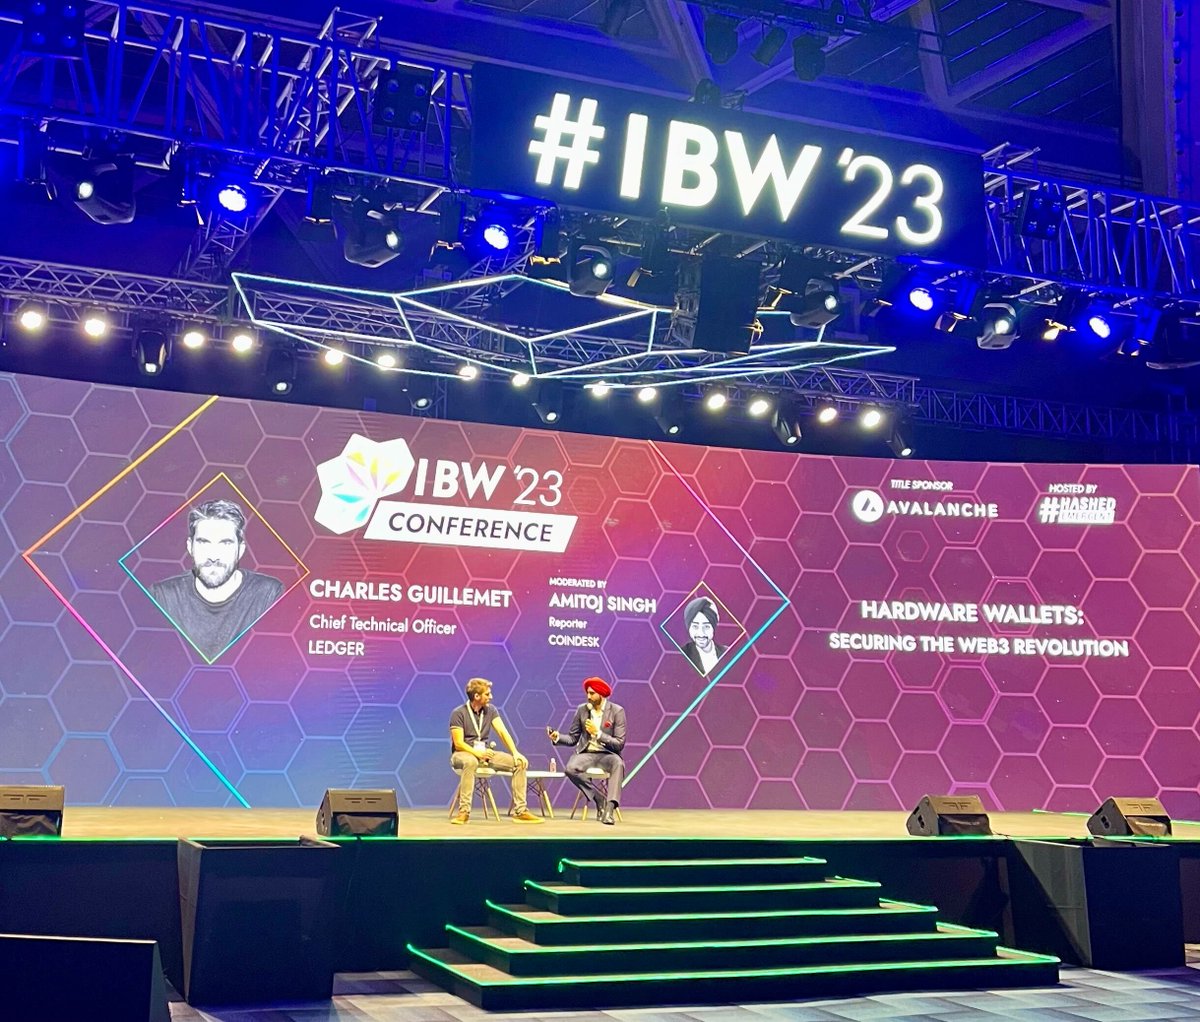 Our CTO @P3b7_ took the stage at @IBWofficial to discuss how hardware wallets will secure the digital revolution! “What make crypto unique? It is permissionless. And the best way to manage it is decentralized consensus and self custody.”